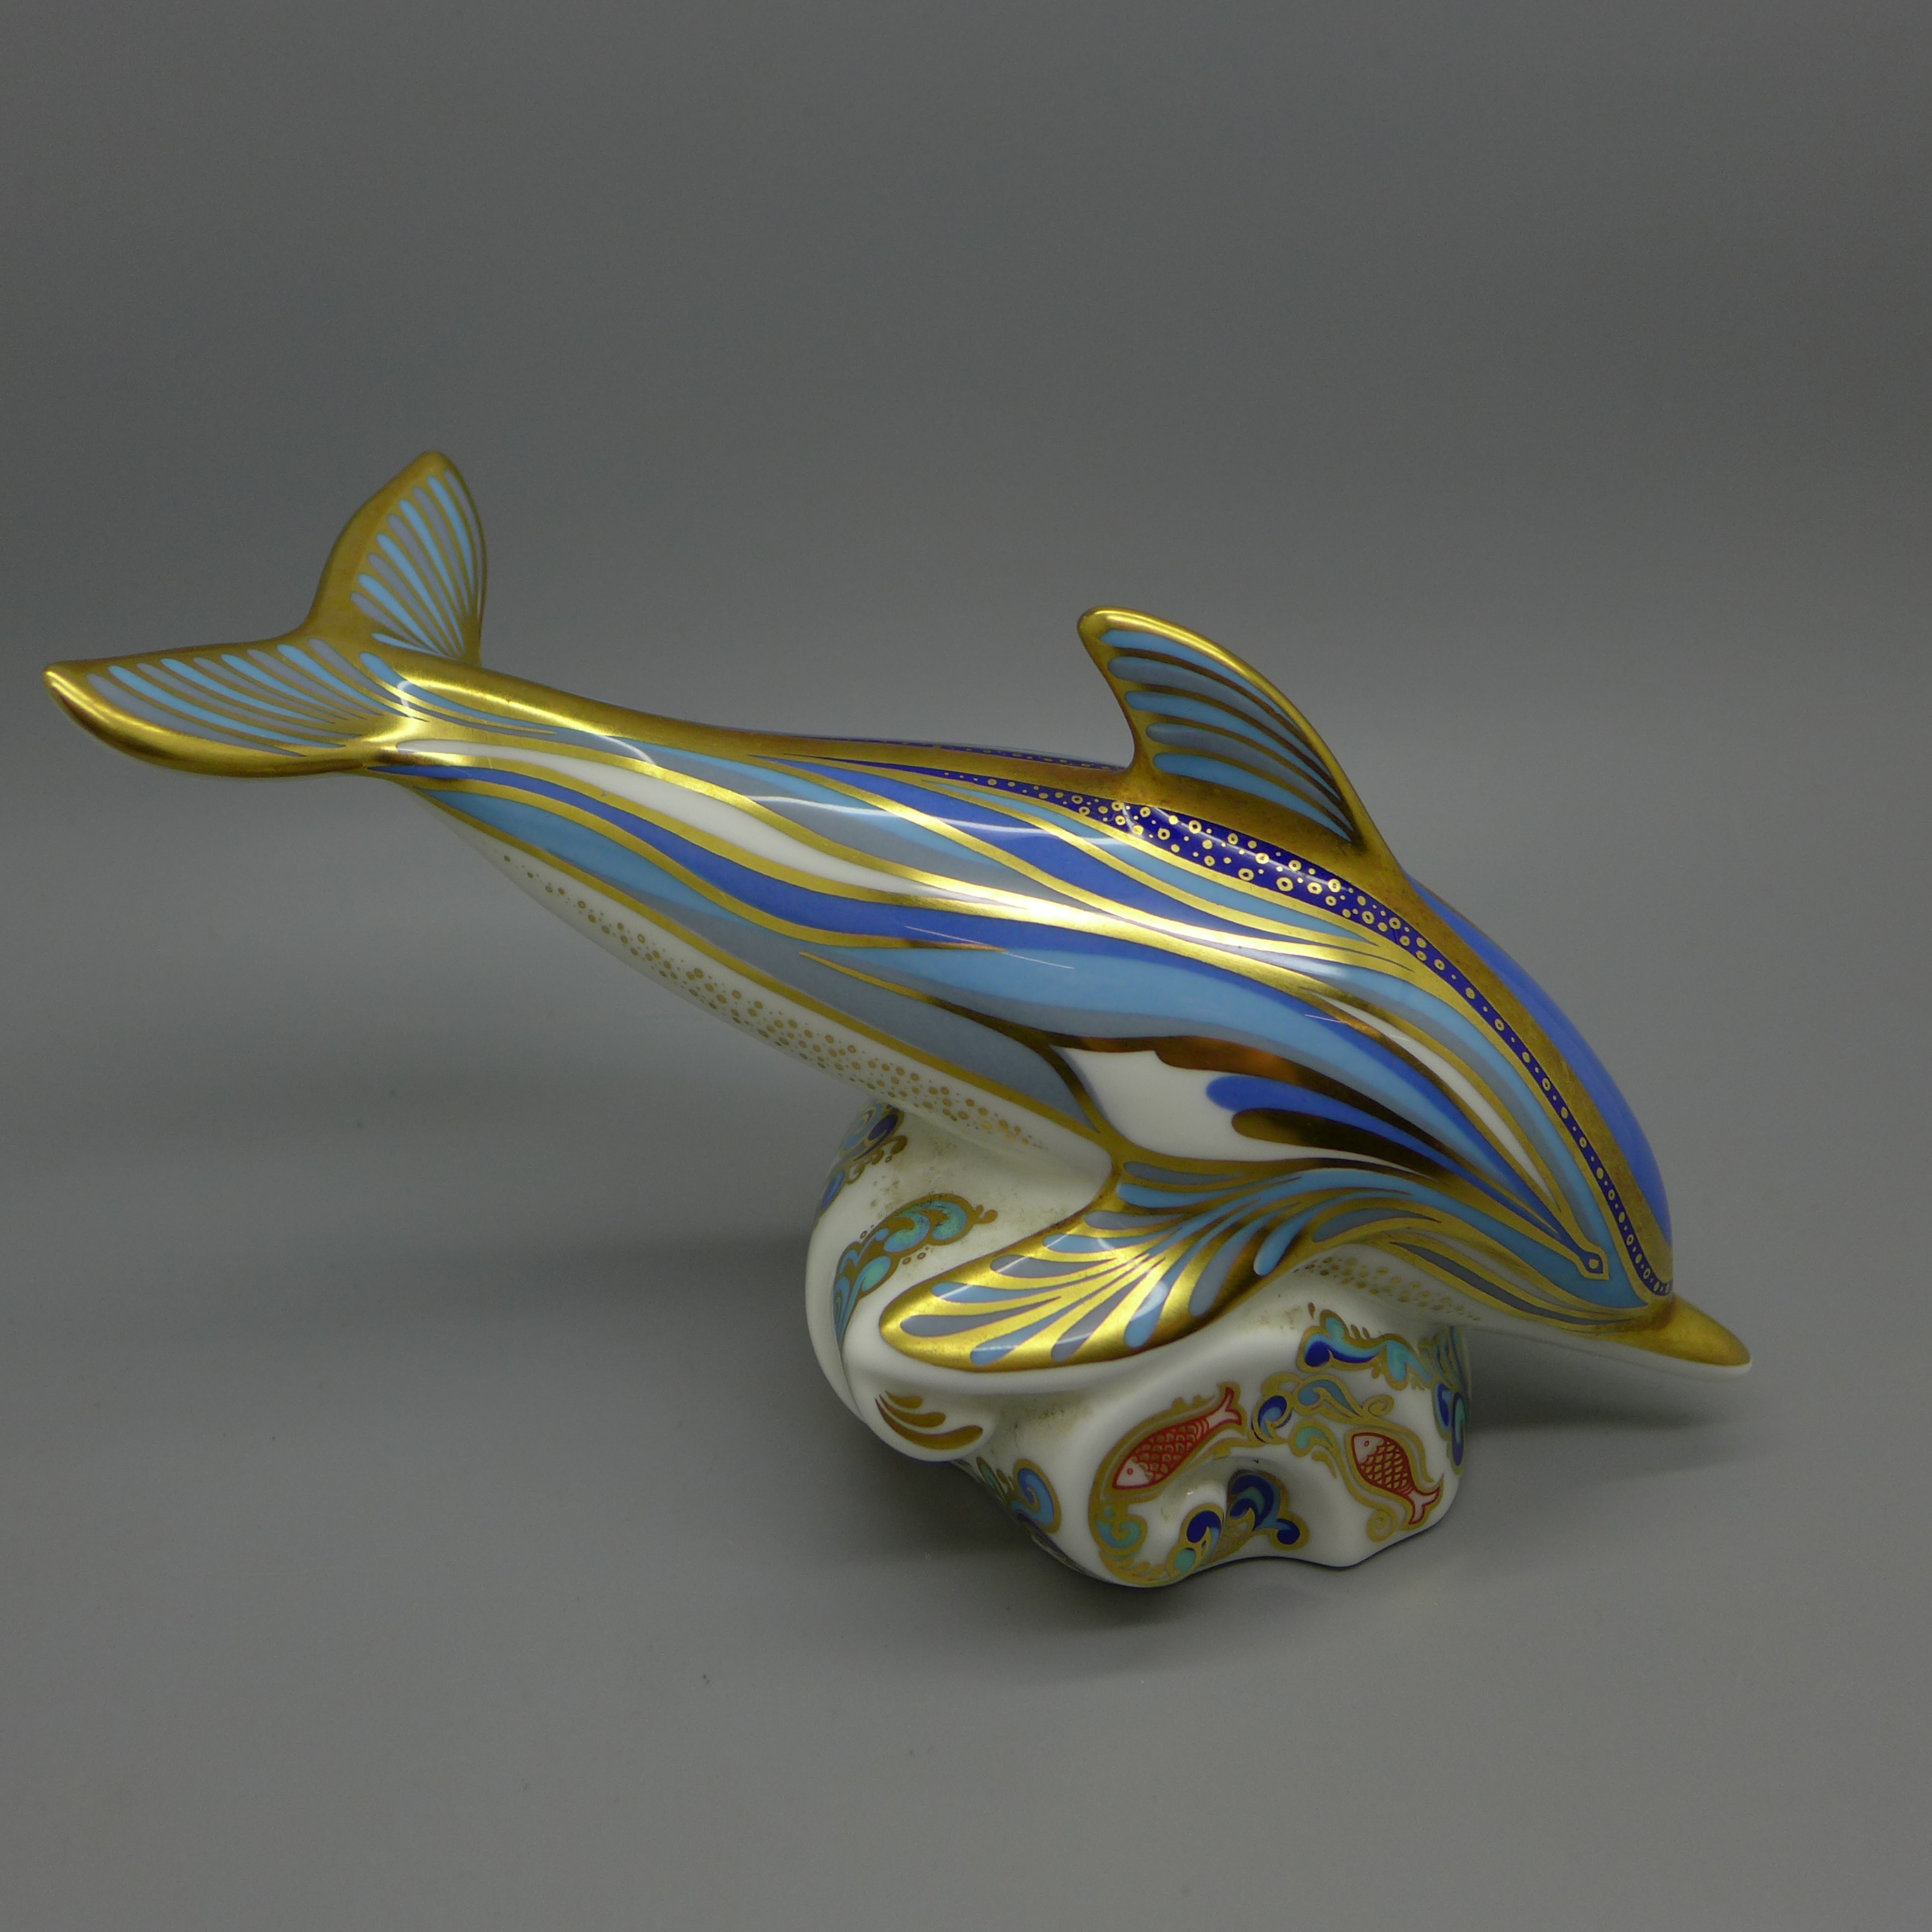 A Royal Crown Derby paperweight - Striped Dolphin, Gold Signature Limited Edition of 1500, - Image 2 of 3